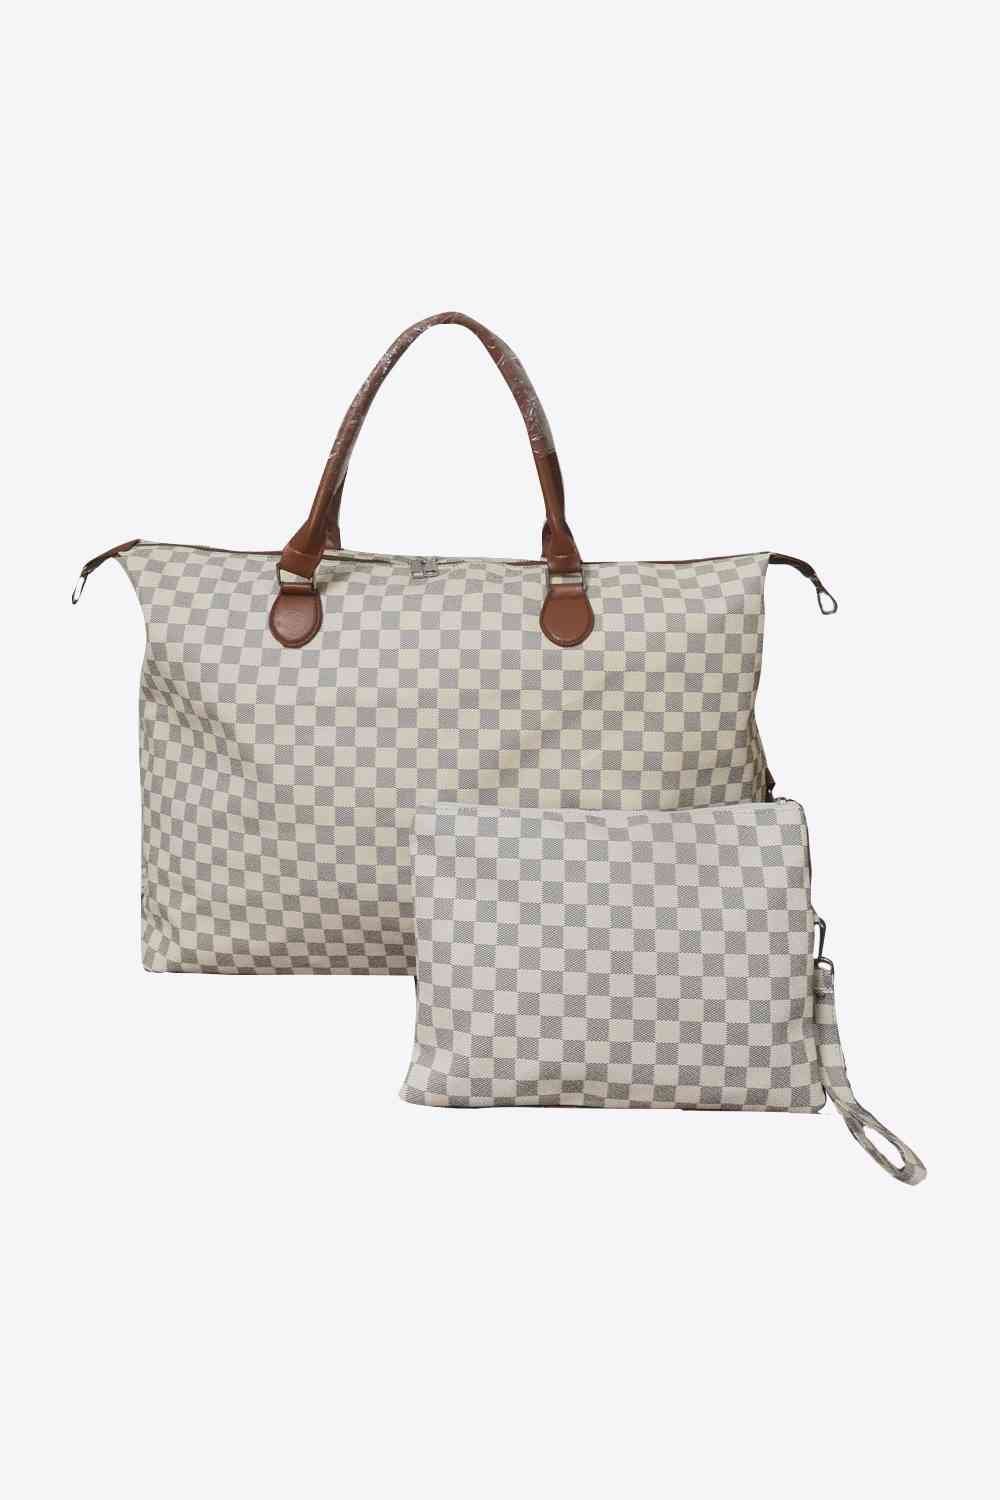 Checkered Two-Piece Bag Set - BloomBliss.com